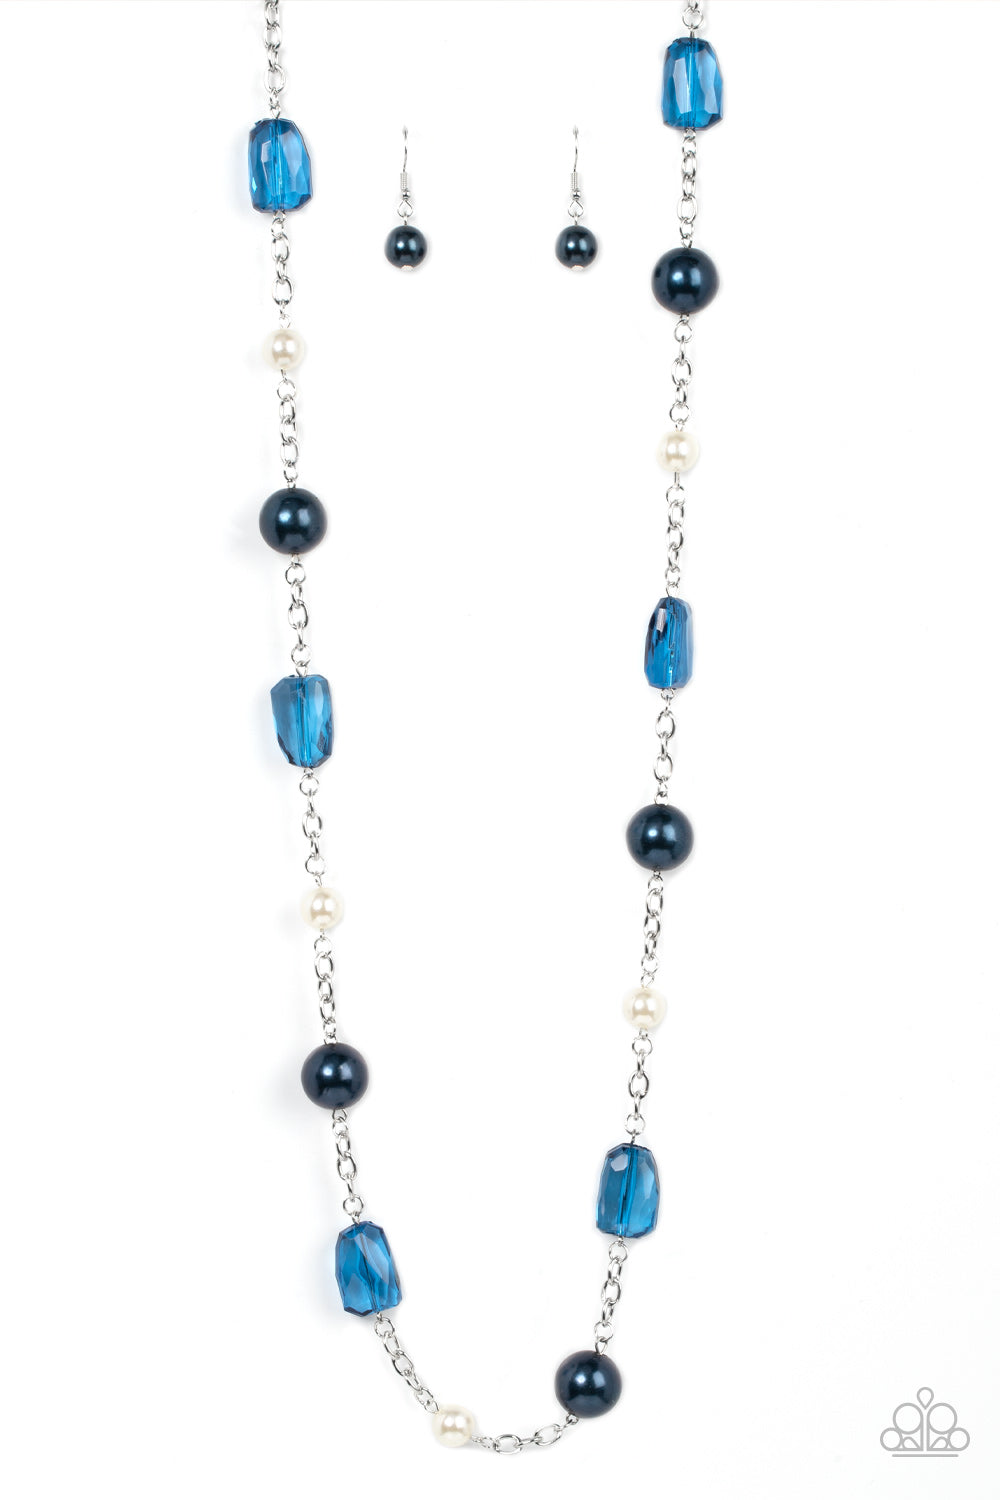 $5 Blue Pearl Necklace & Earring SET - A-List Appeal - Blue - Bubbly Spring Lake and Rhodonite pearls join Mykonos Blue crystal-like gems along a silver chain, resulting in a prismatic pop of color across the chest.